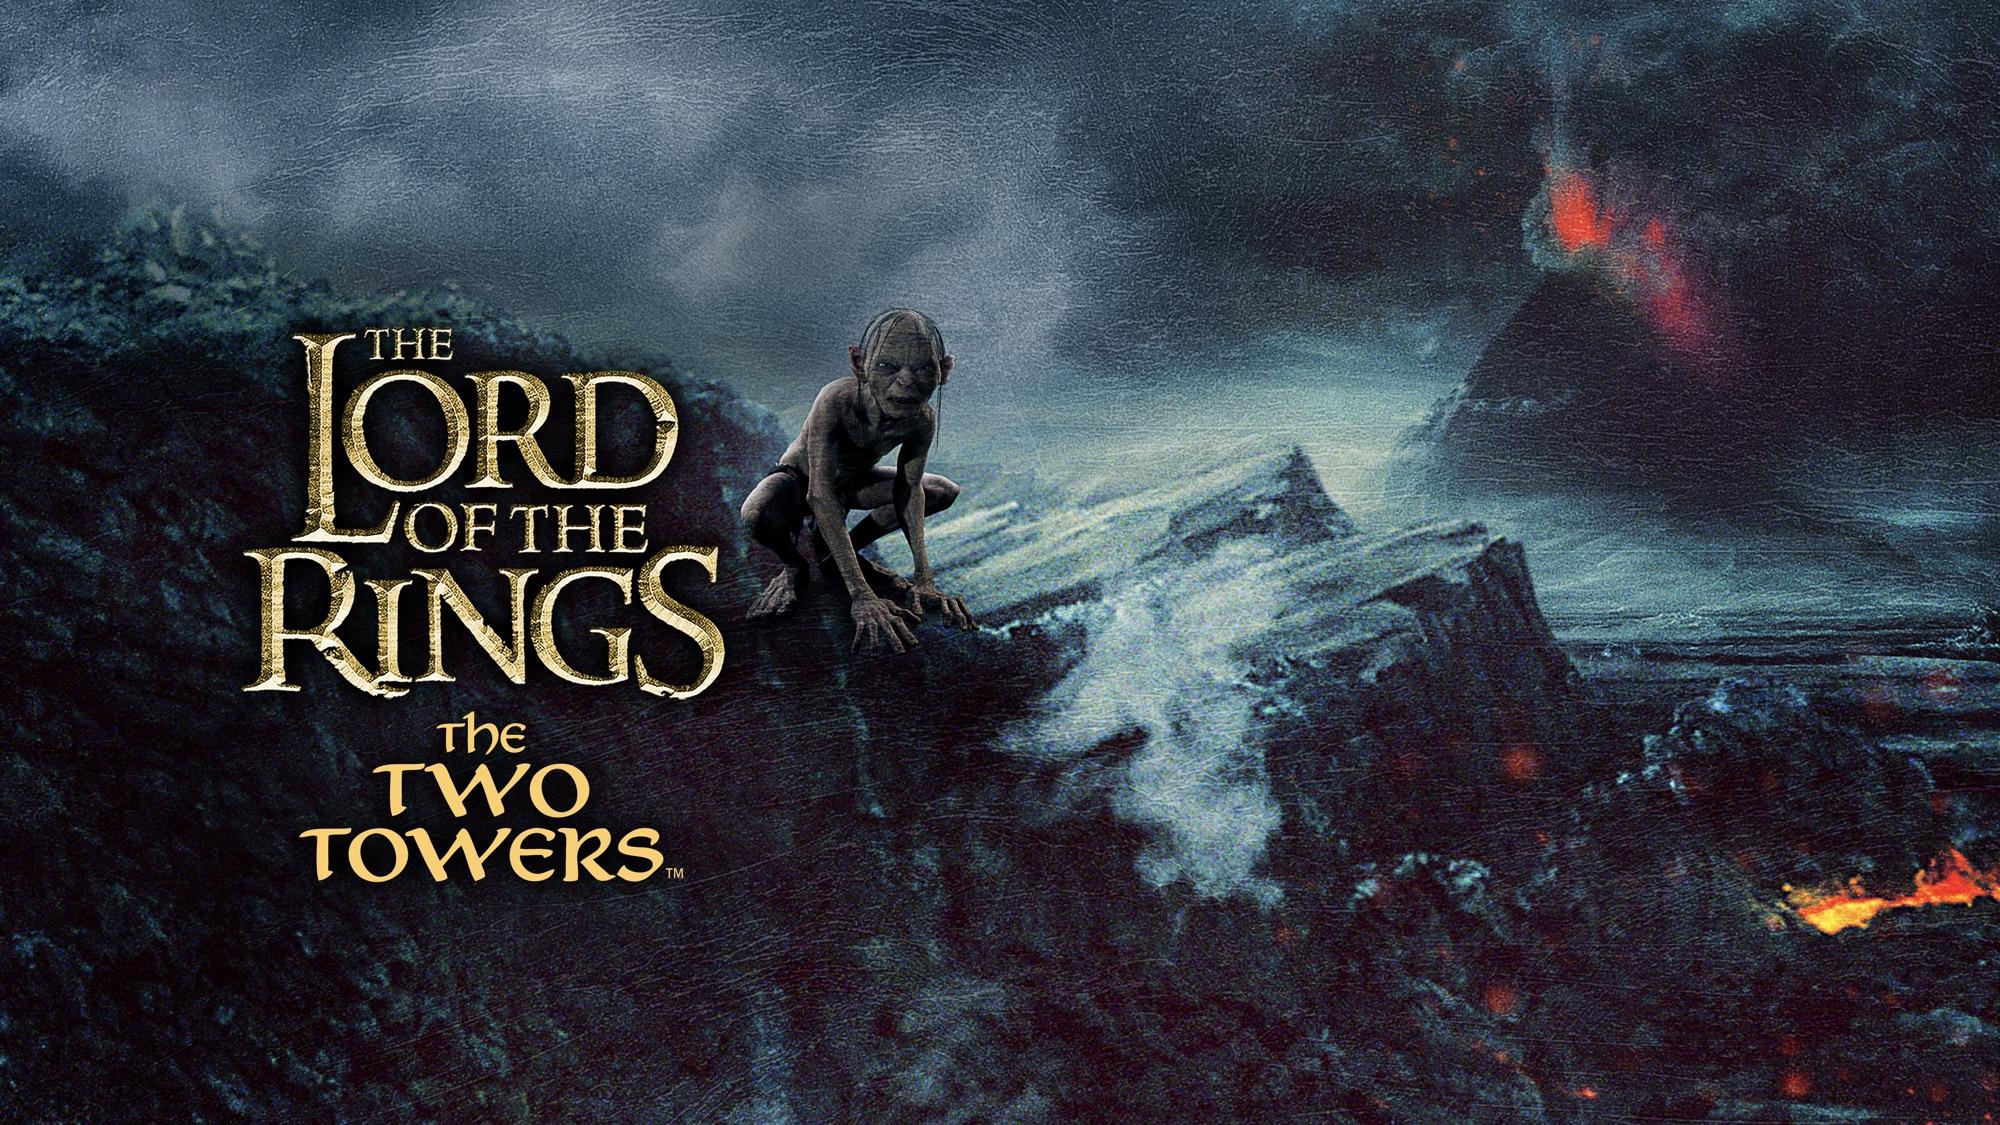 download the new version for ios The Lord of the Rings: The Two Towers